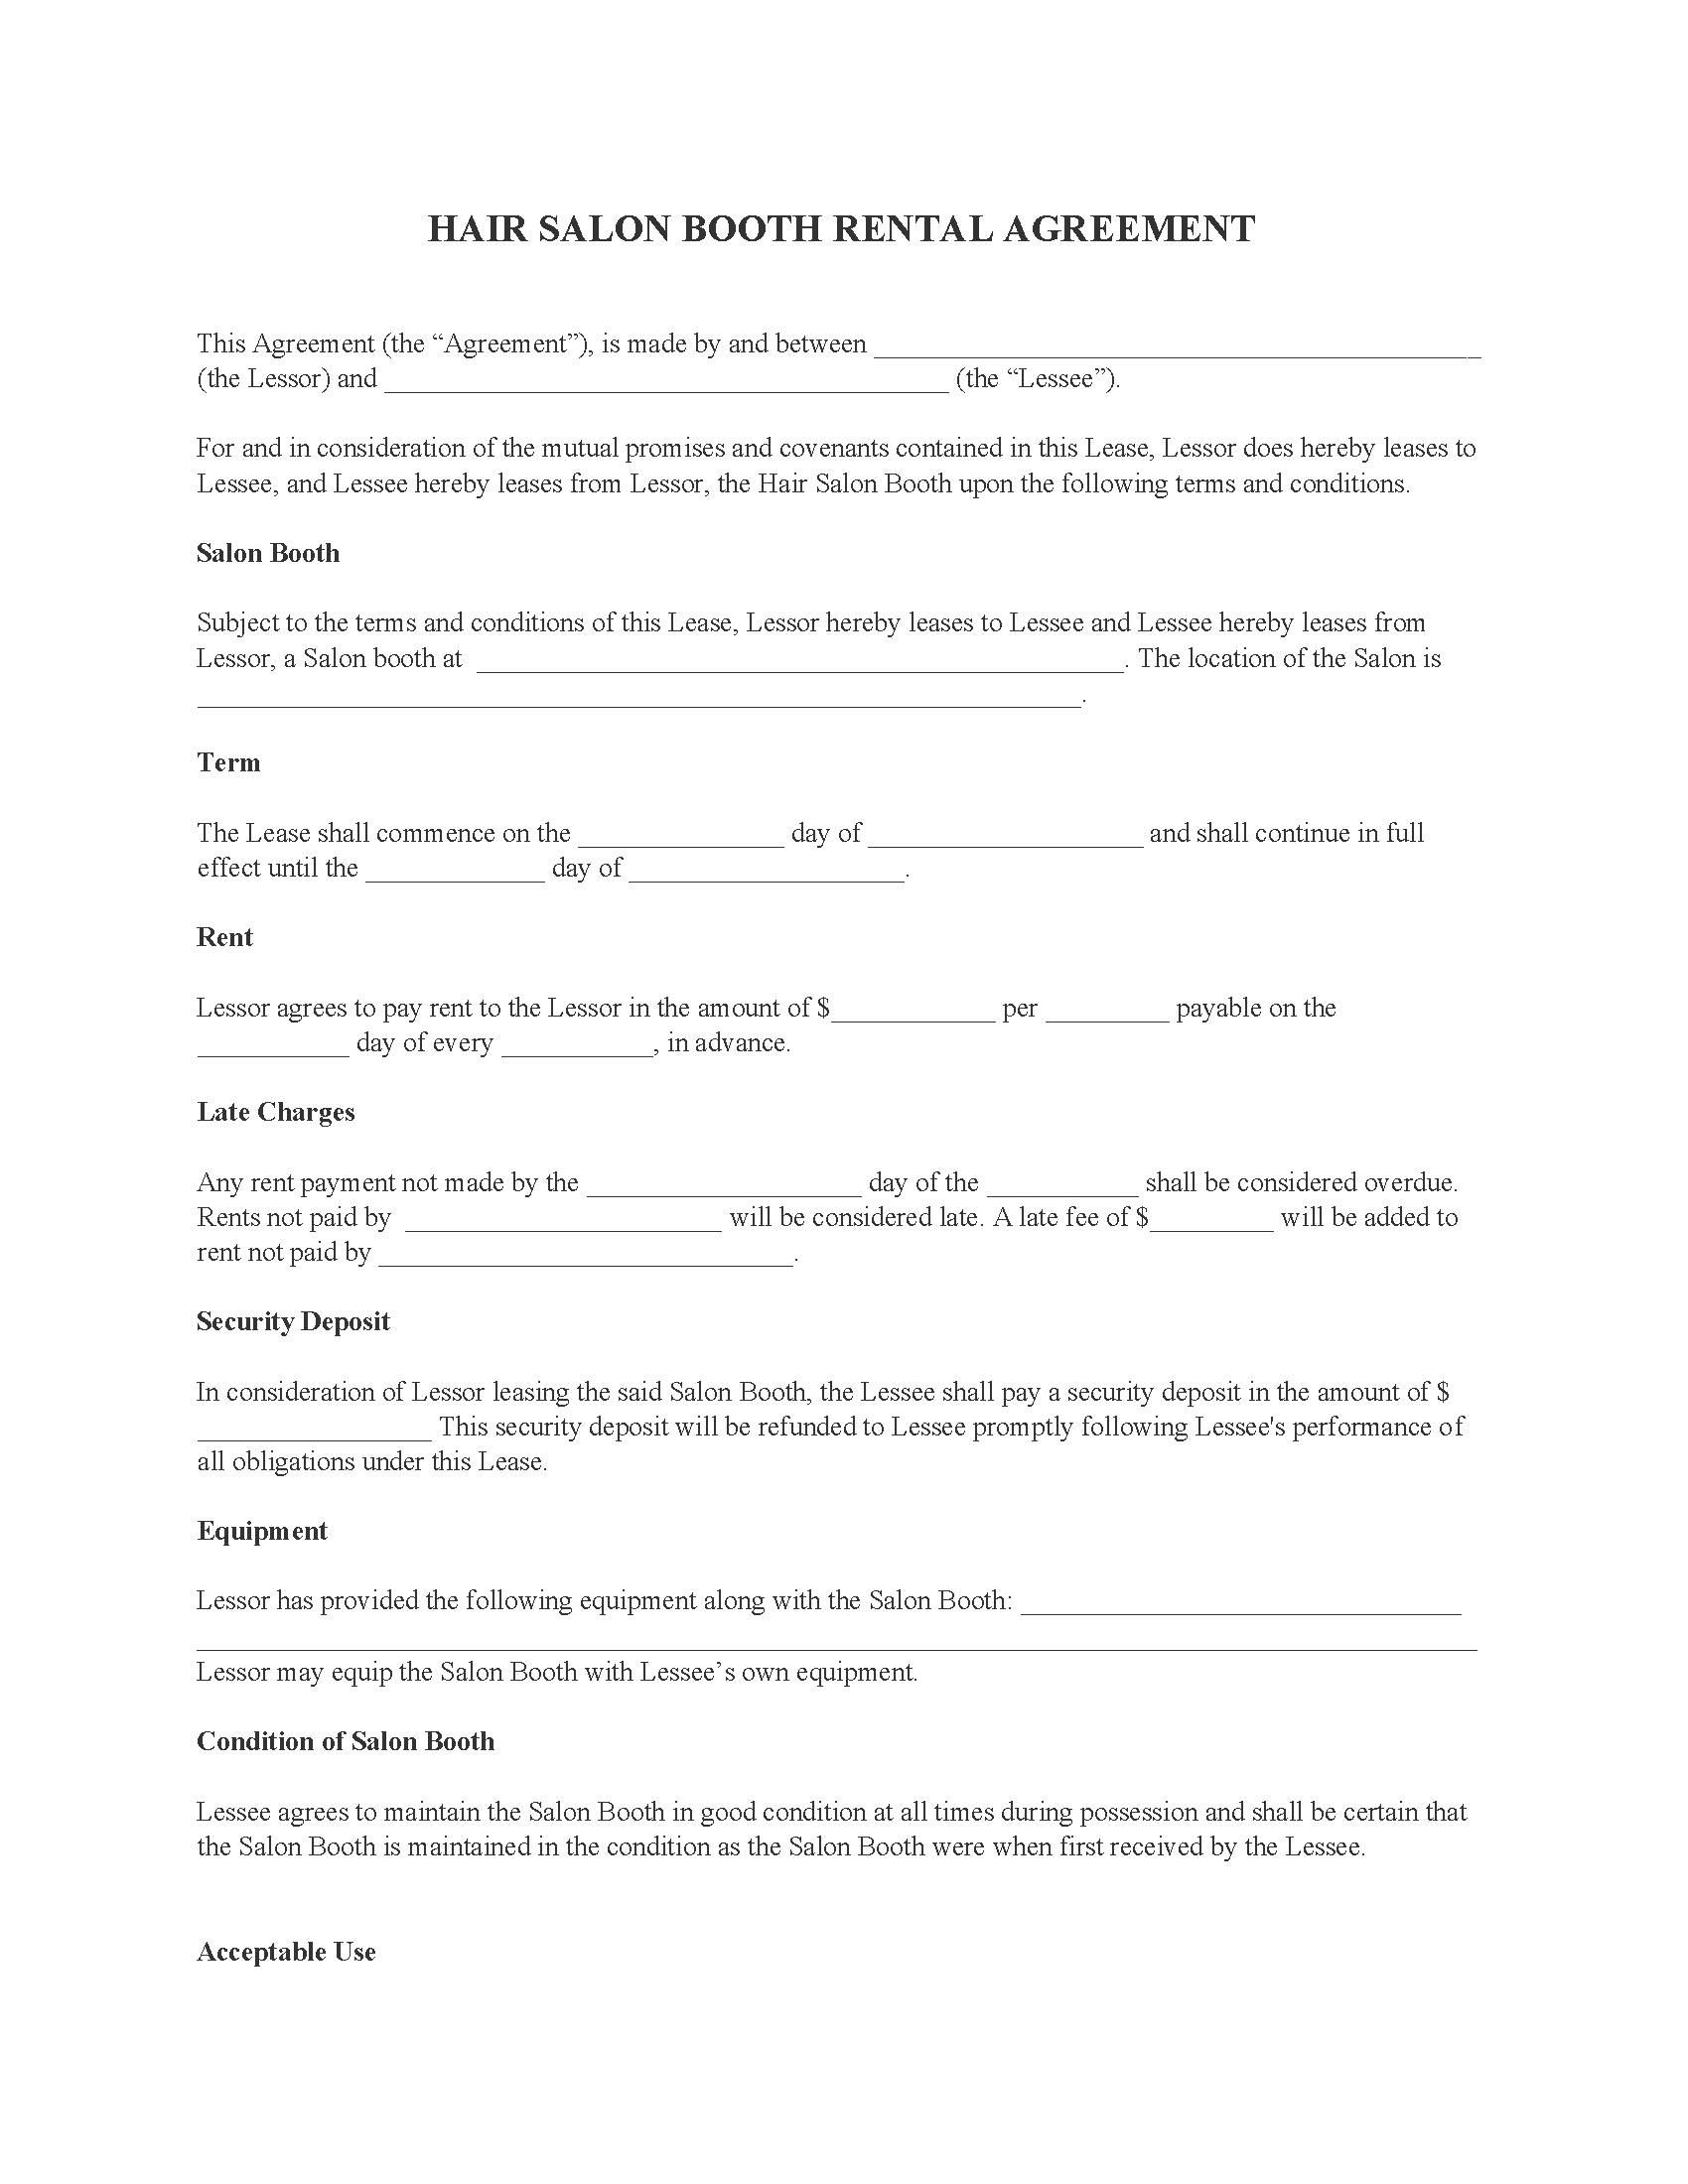 Rental & Lease Forms Archives Free Printable Legal Forms